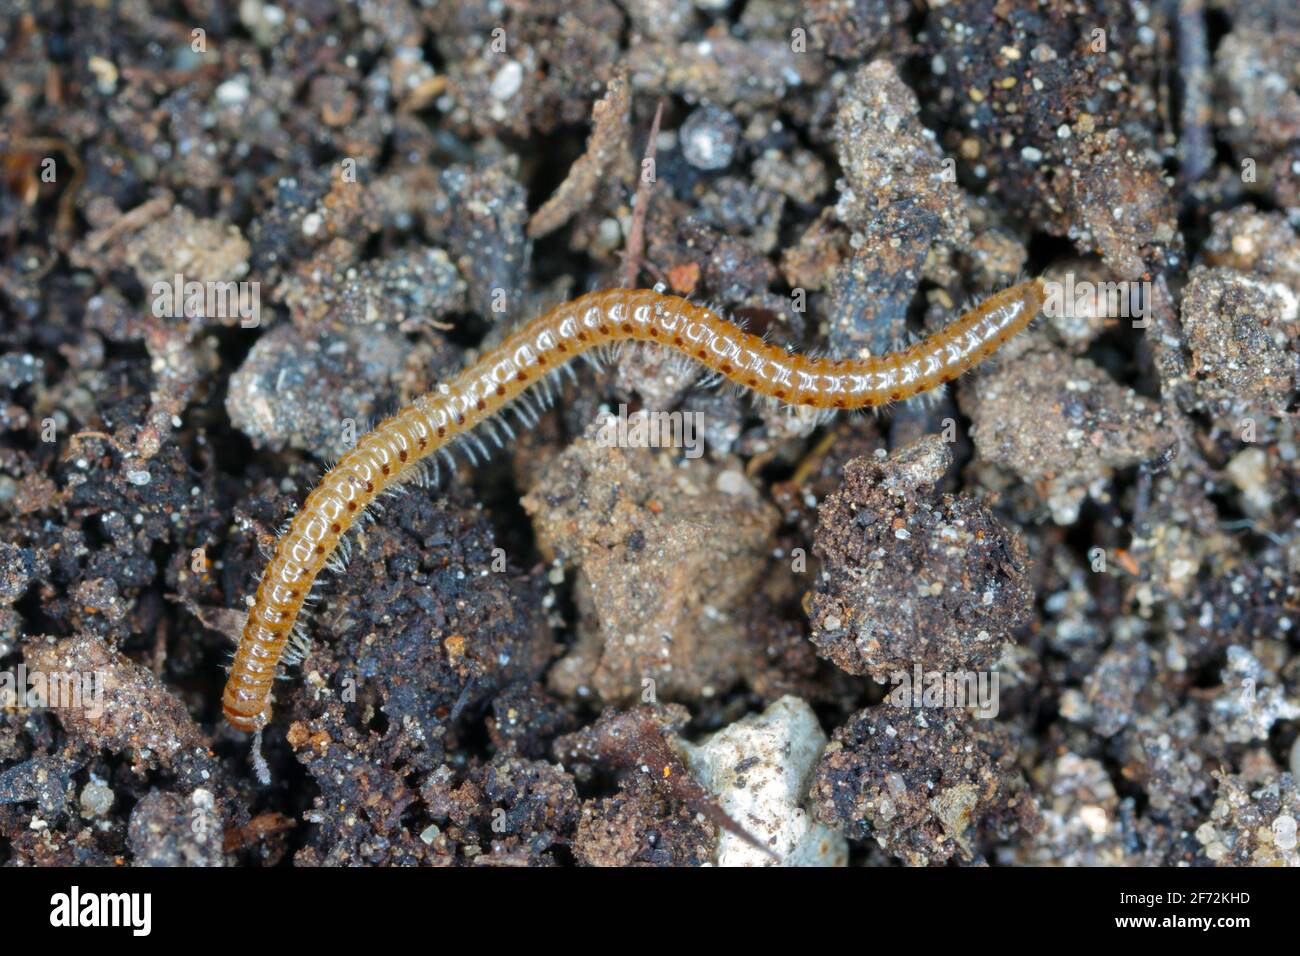 Blaniulus guttulatus, commonly known as the spotted snake millipede is a species of millipede in the family Blaniulidae. This worm living in the soil. Stock Photo